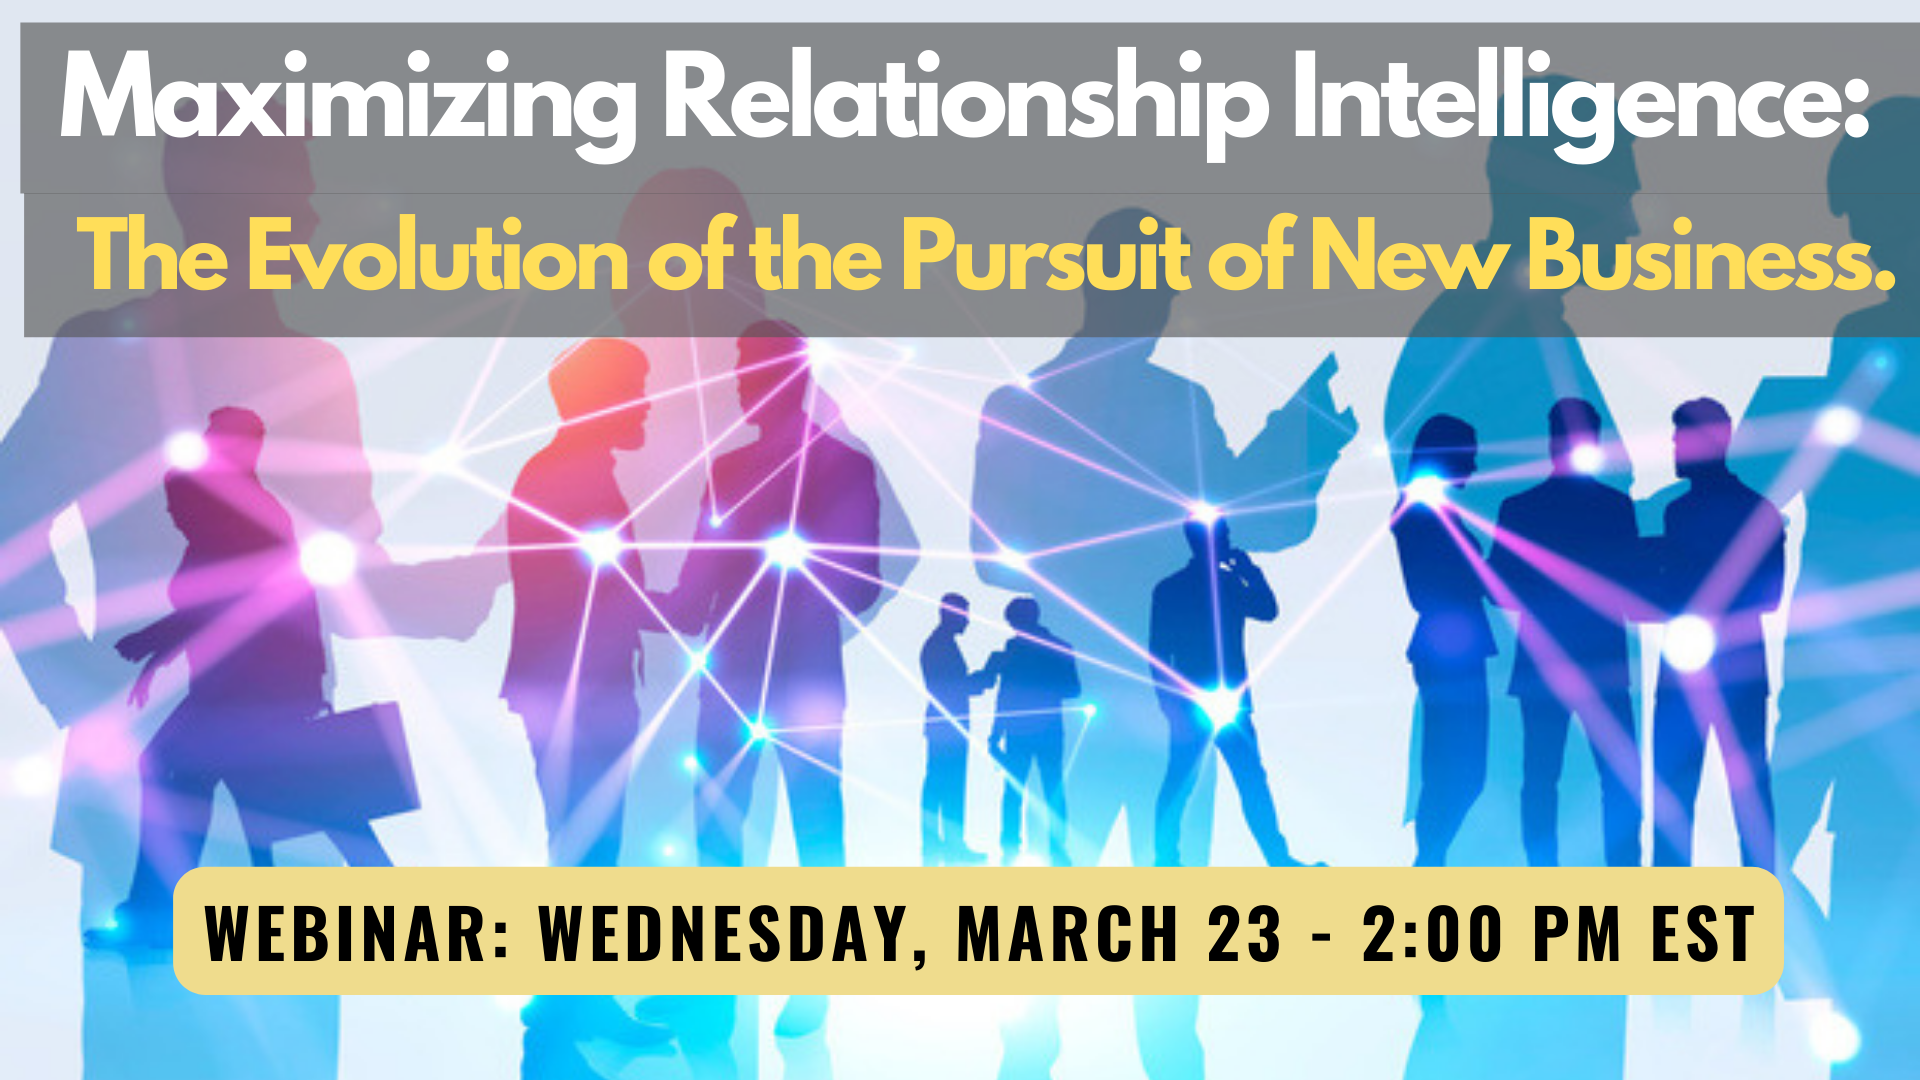 Maximizing Relationship Intelligence: The Evolution of the Pursuit of New Business